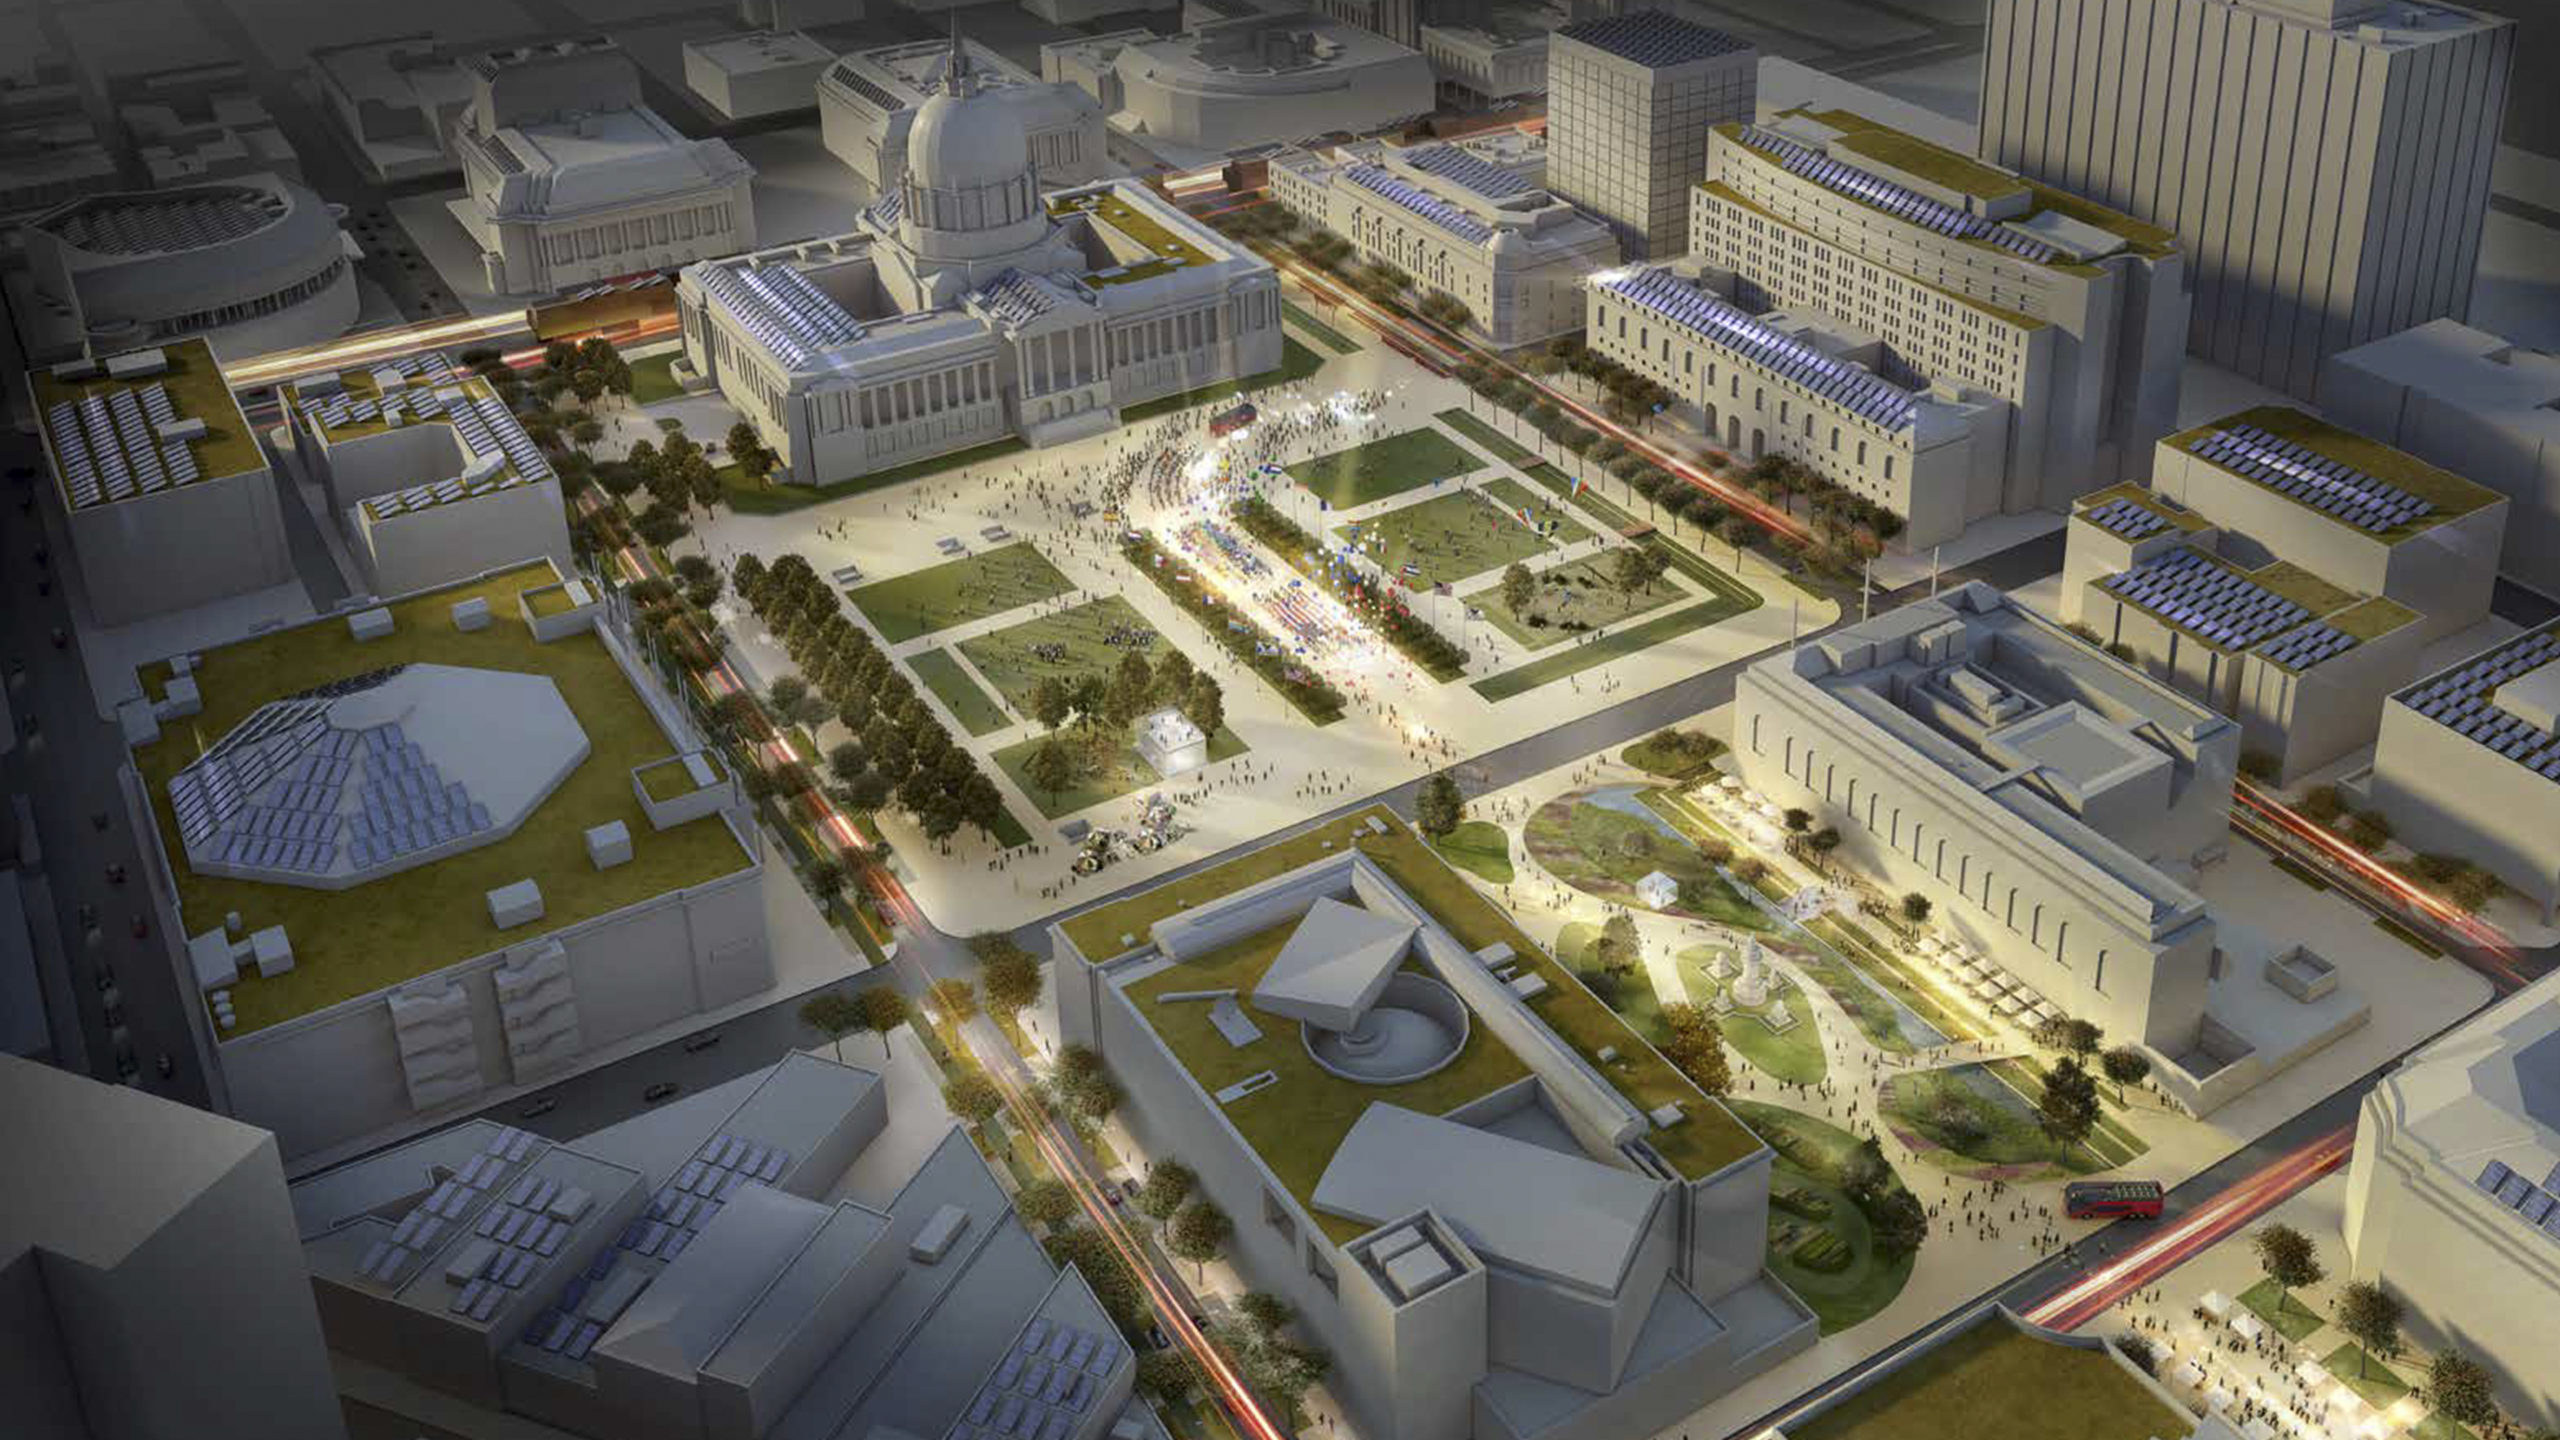 San Francisco Civic Center Sustainable District | Image 1/7